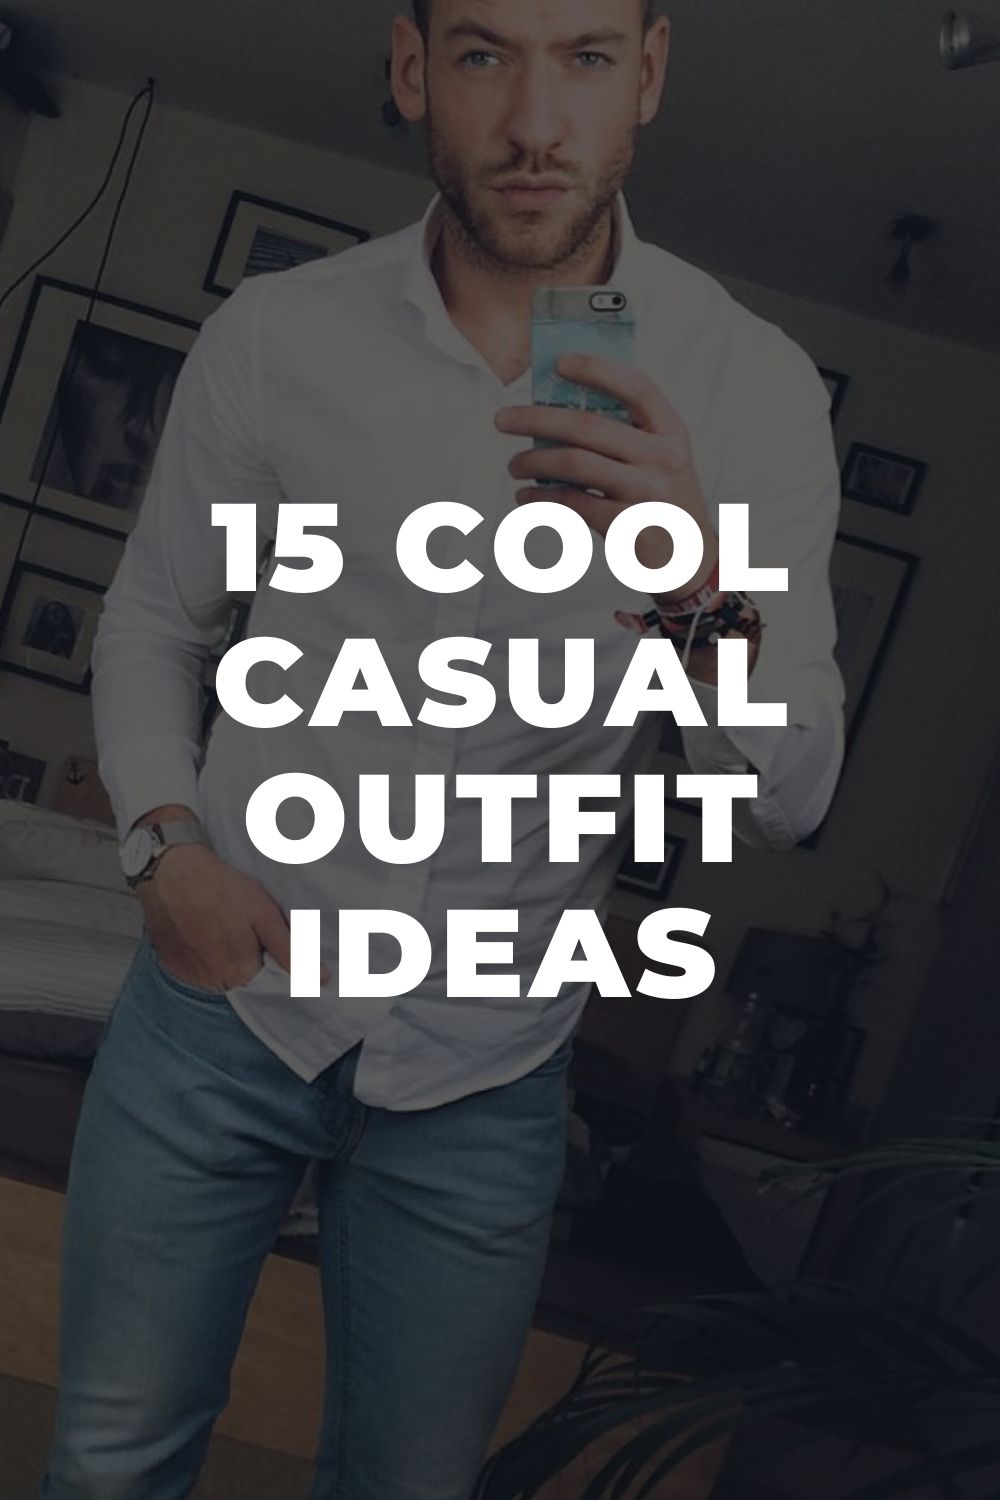 15 Cool Casual Outfit Ideas